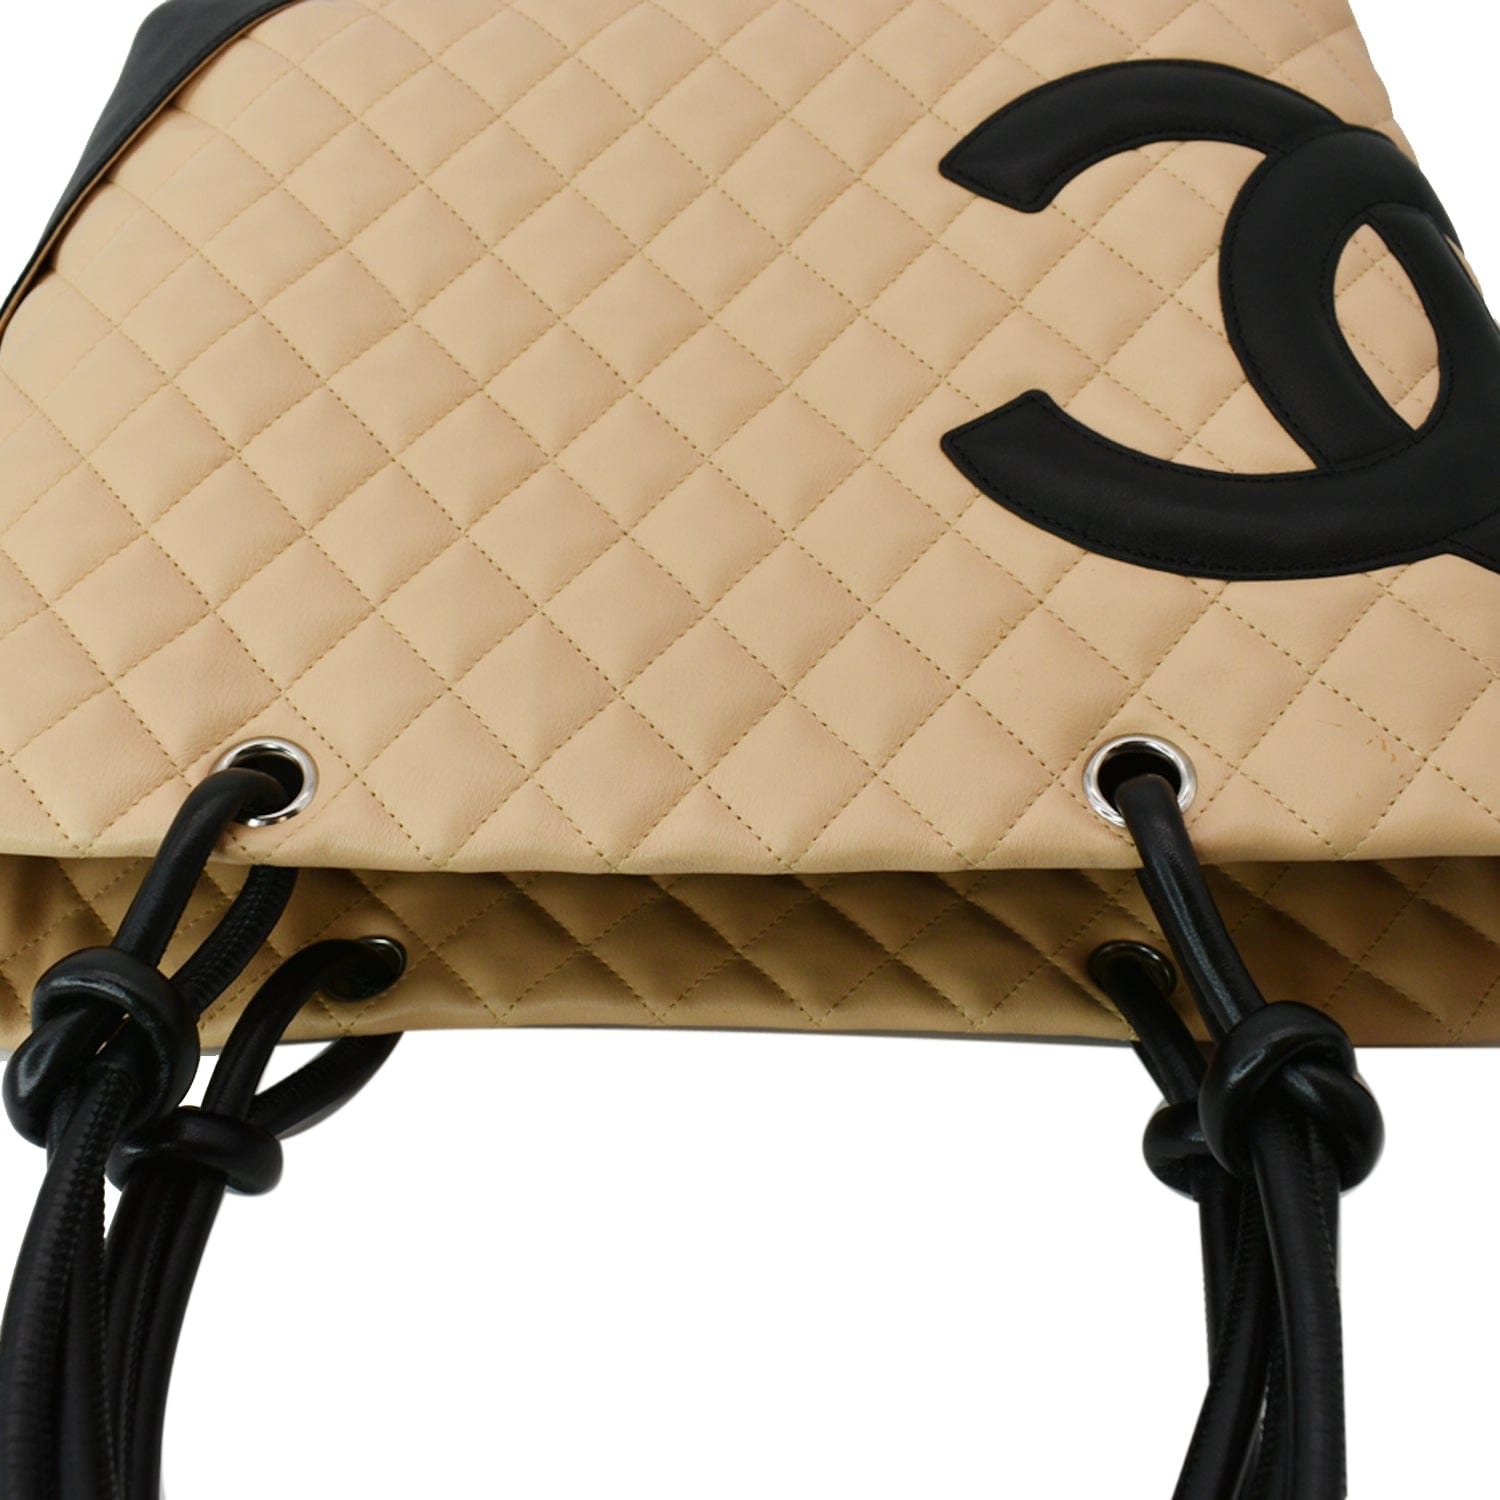 CHANEL 2005 BEIGE QUILTED CAMBON BAG